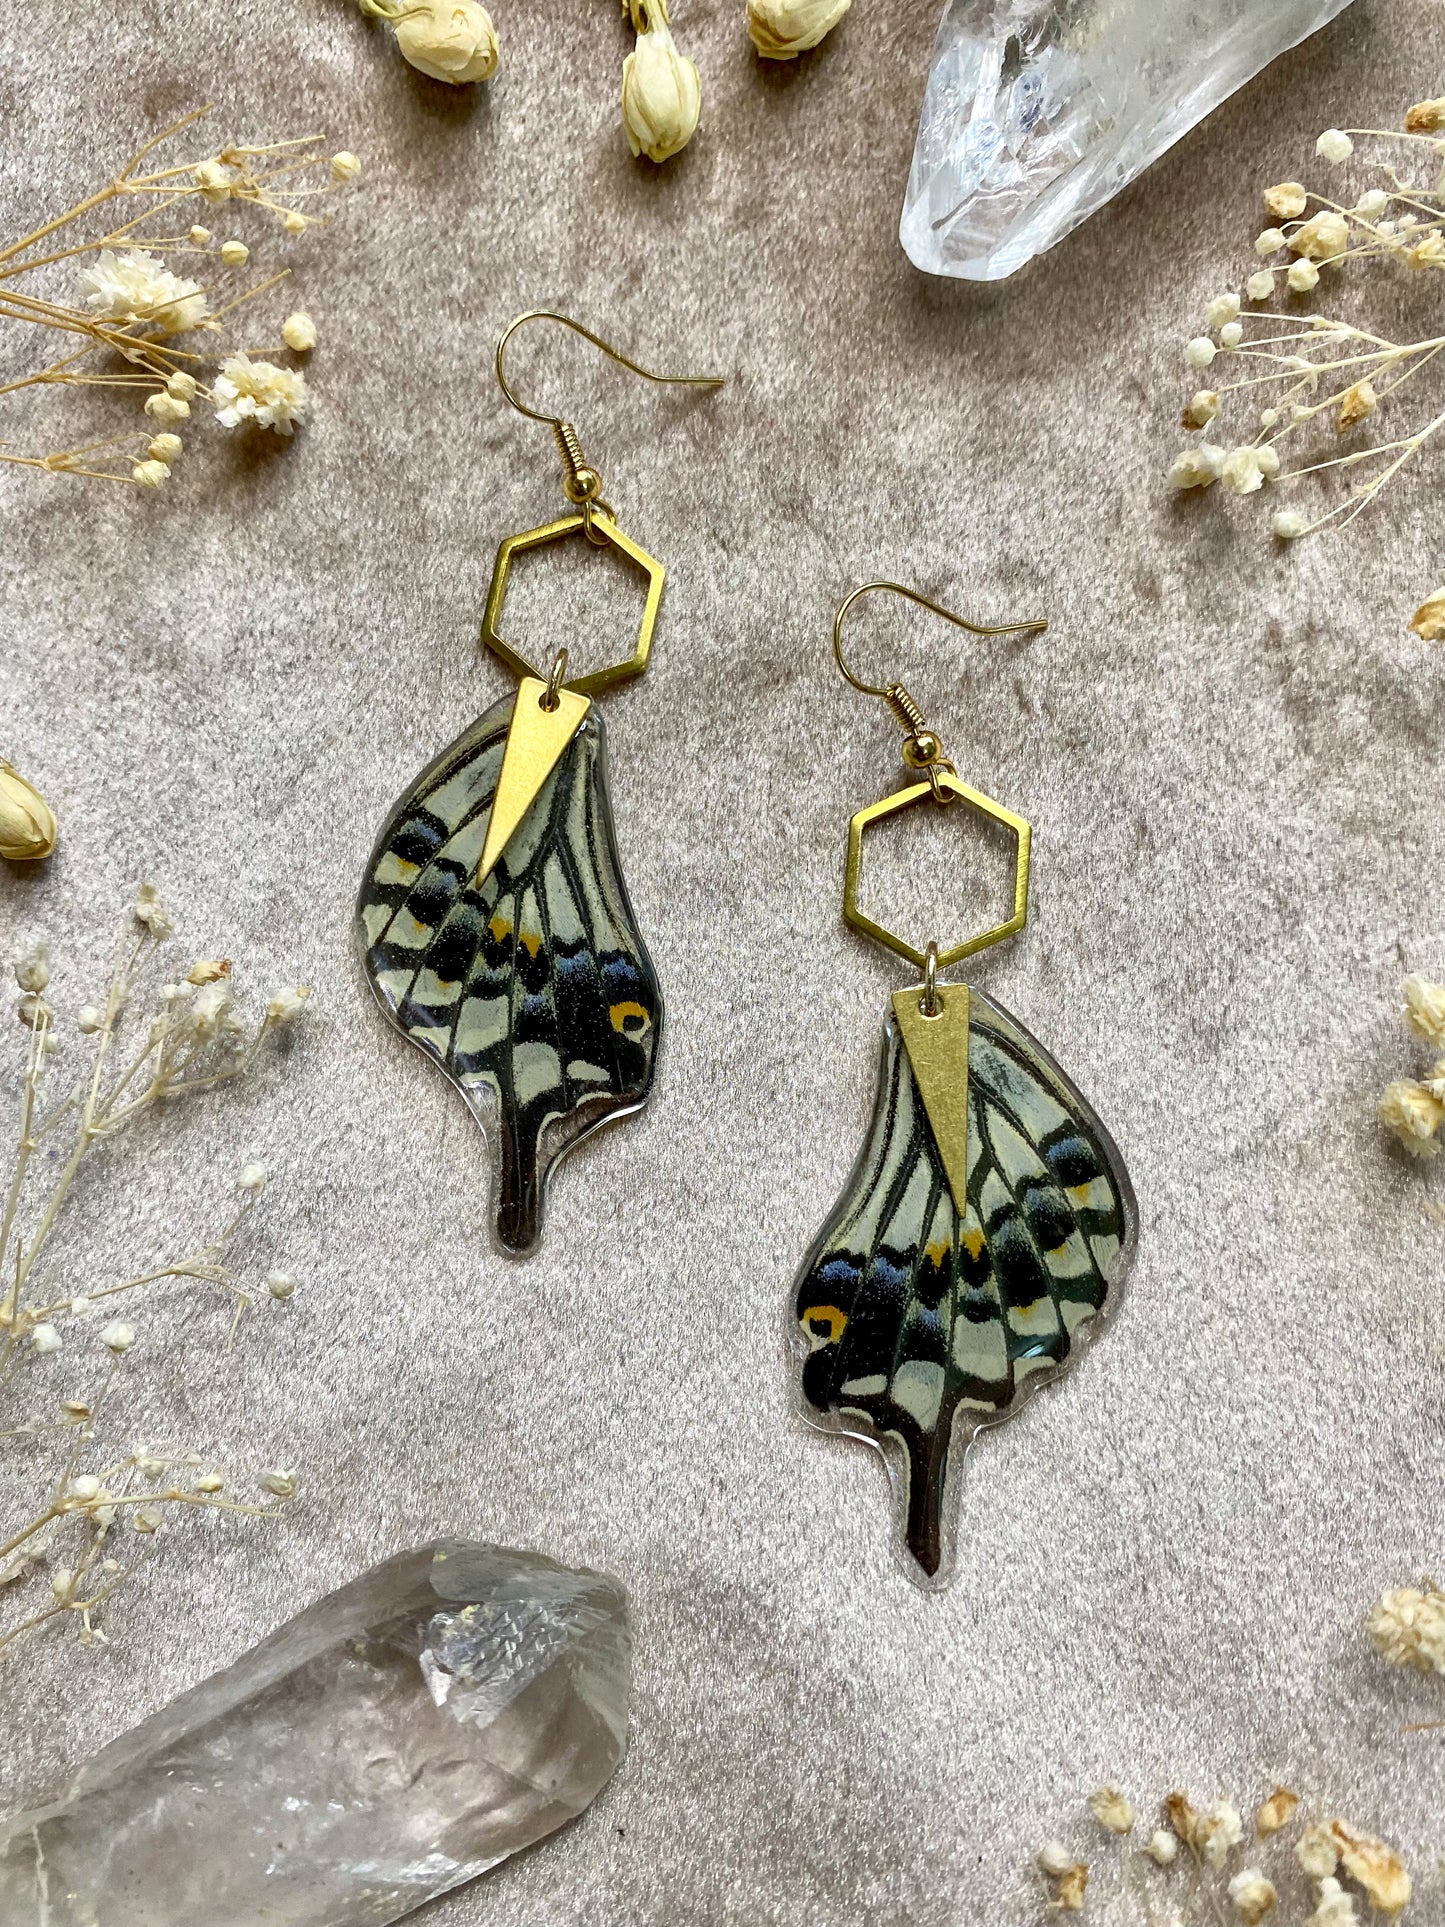 Black and White Asian Swallowtail Butterfly Wing Earrings (Bottom Wings)